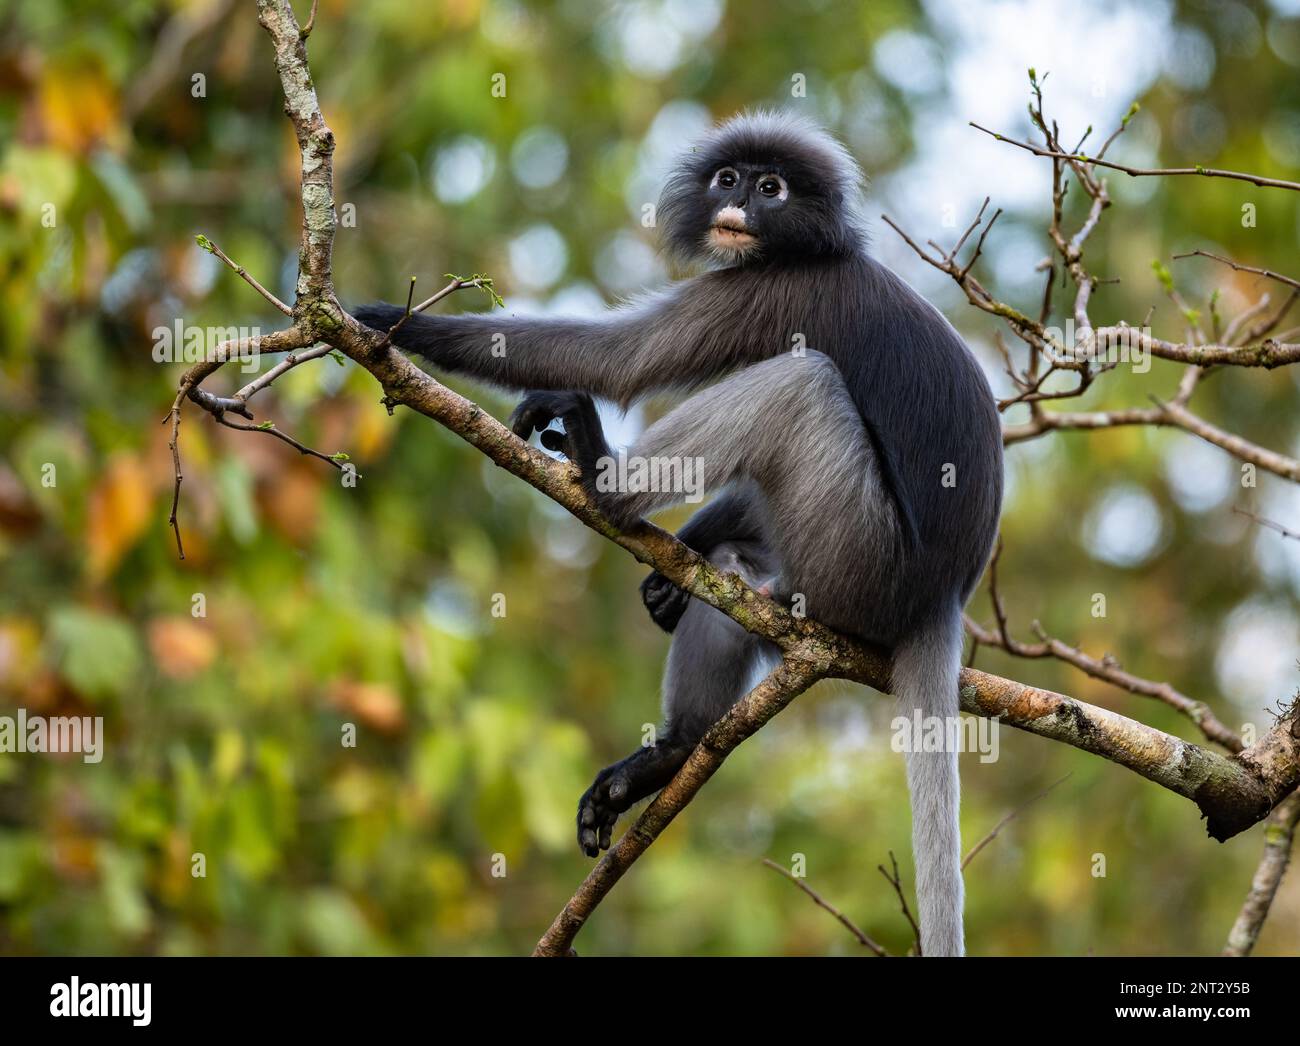 A Dusky Leaf Monkey (Trachypithecus obscurus) sitting on a branch. Thailand. Stock Photo